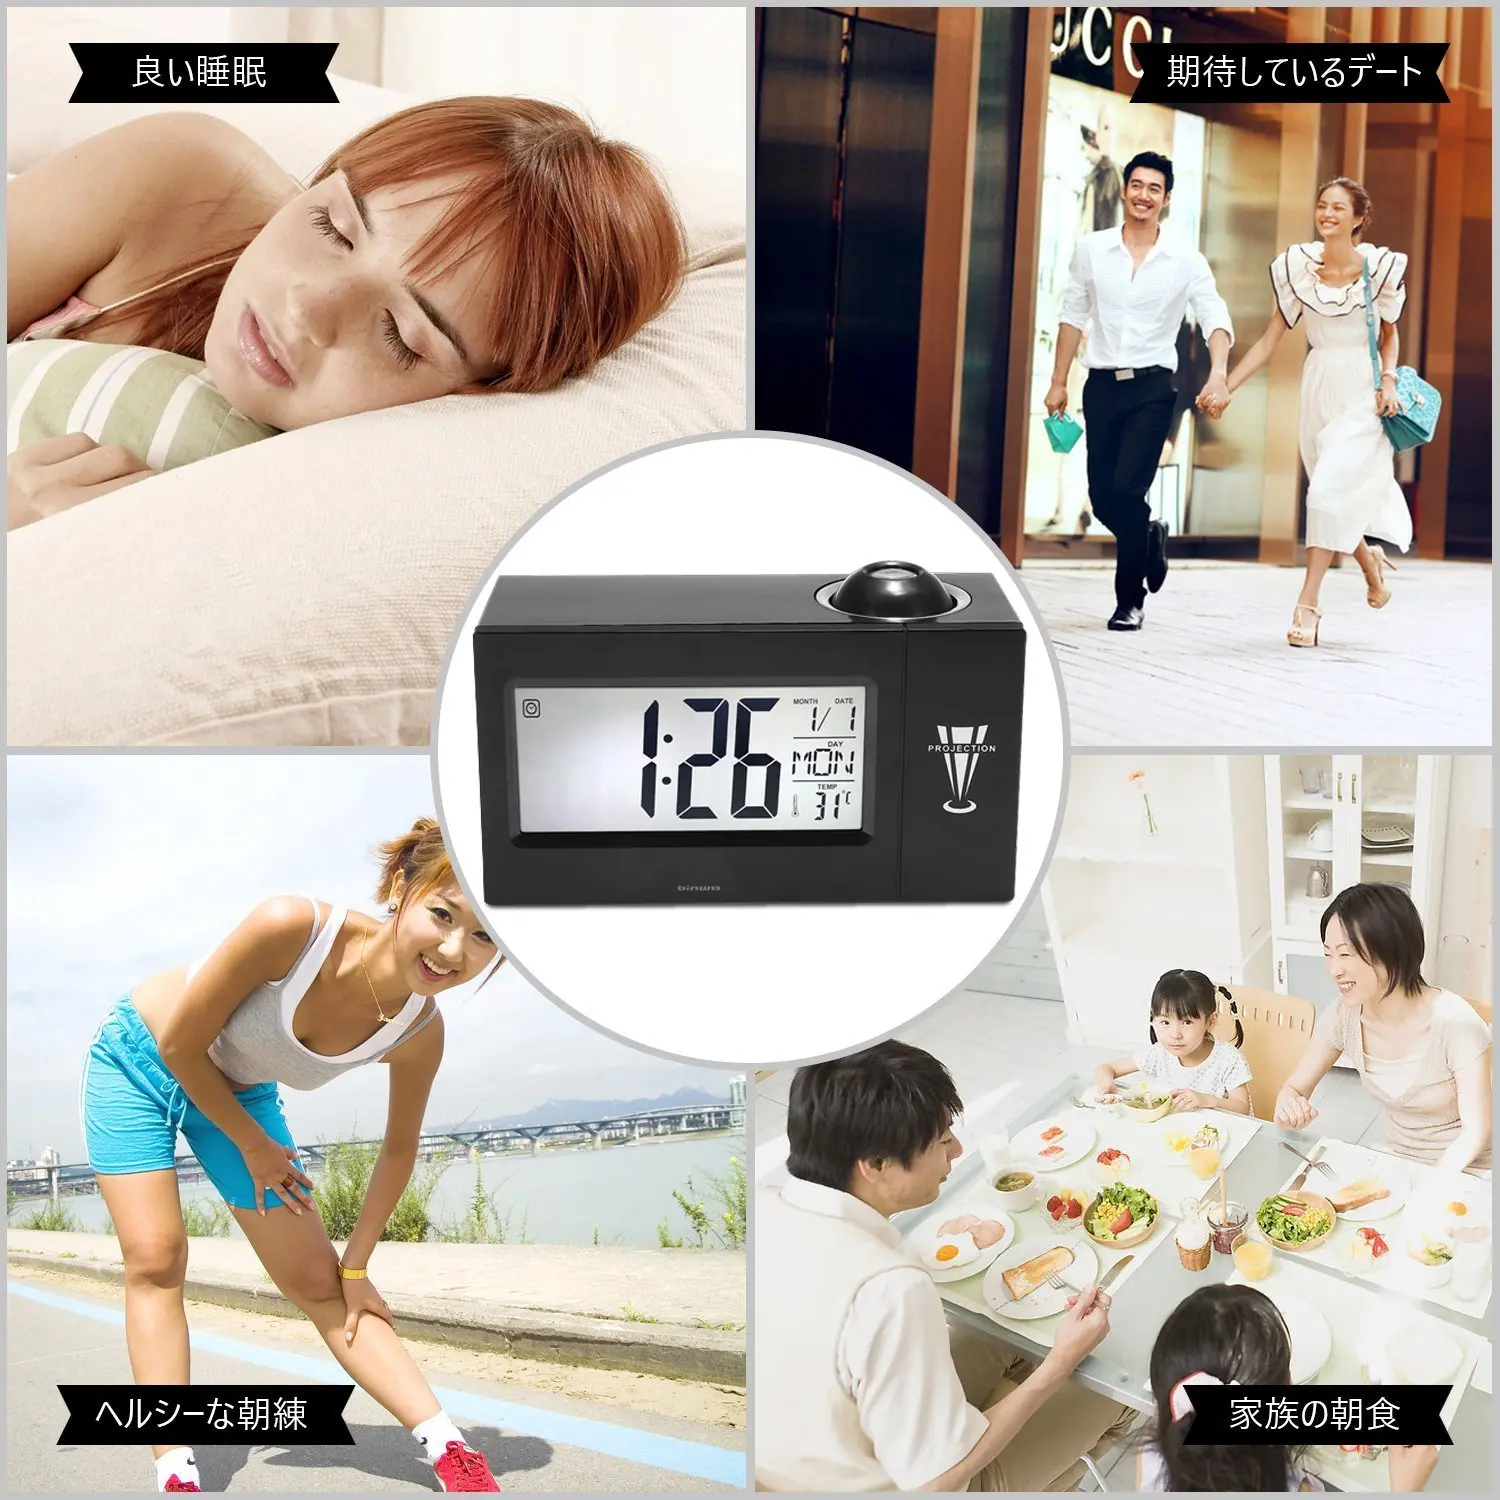 Digital Clock Binwo Bedside Time Projection Alarm Clock With 4 BIG LED Display For Day Date Temperature  Humidity  Loud Alarm Clock with Smart Backlight